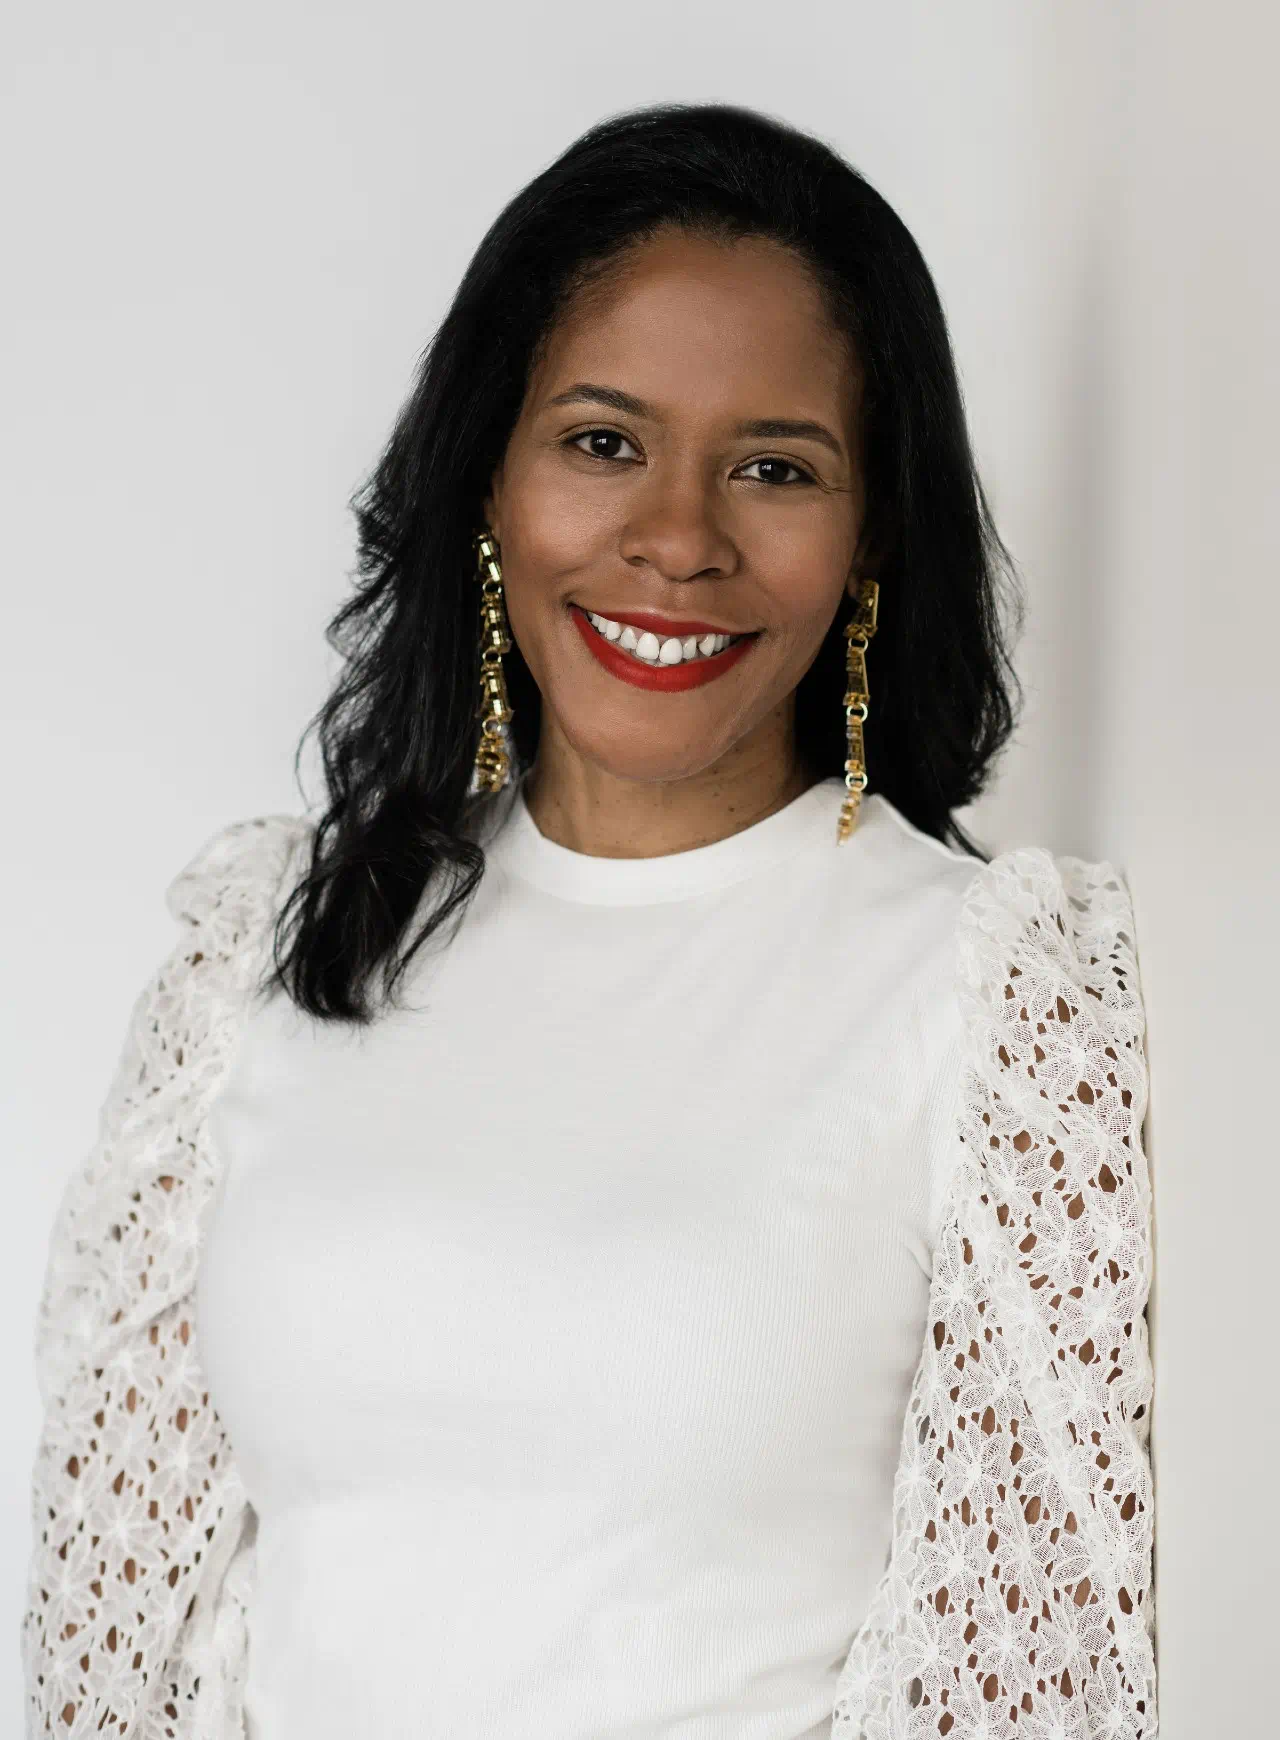  Headshot of Ruth Nicole Brown. She is smiling. She has on red lipstick, gold earrings, and is wearing a white shirt while being photographed in front of a white background. 